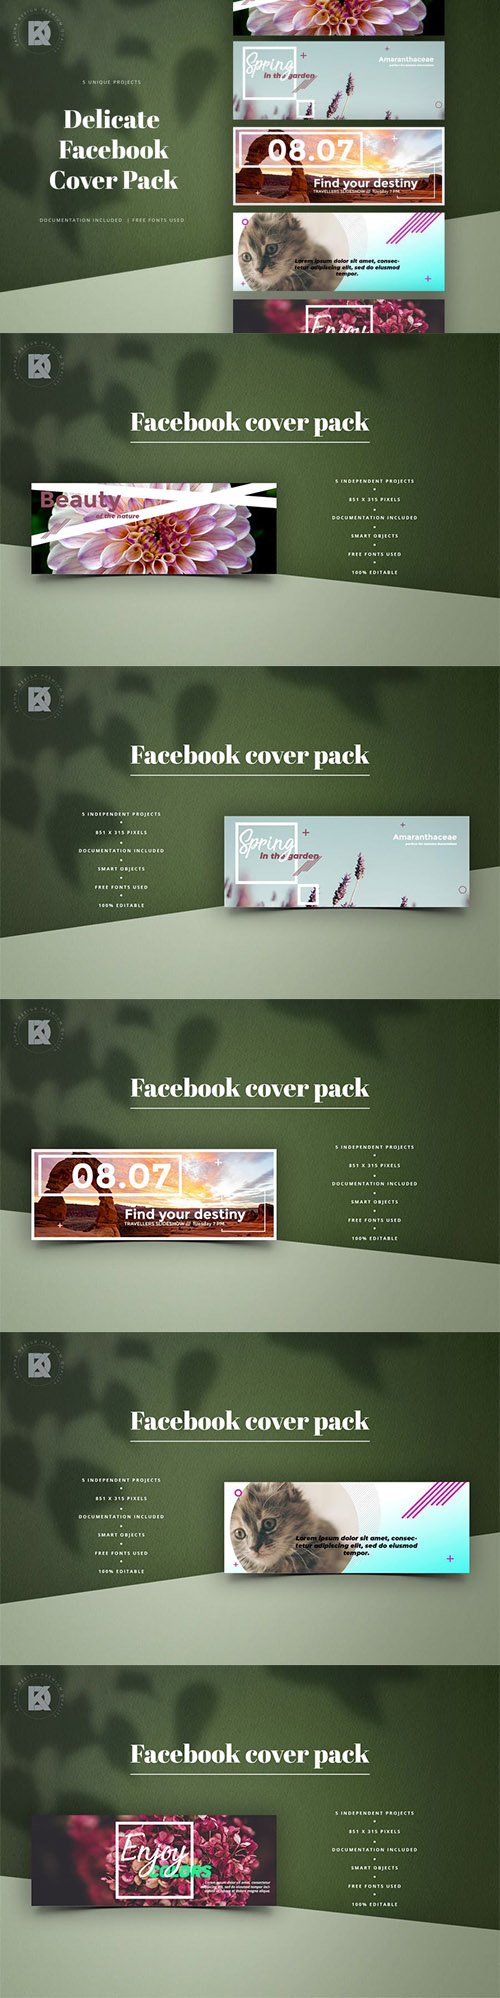 Delicate Facebook Cover Pack